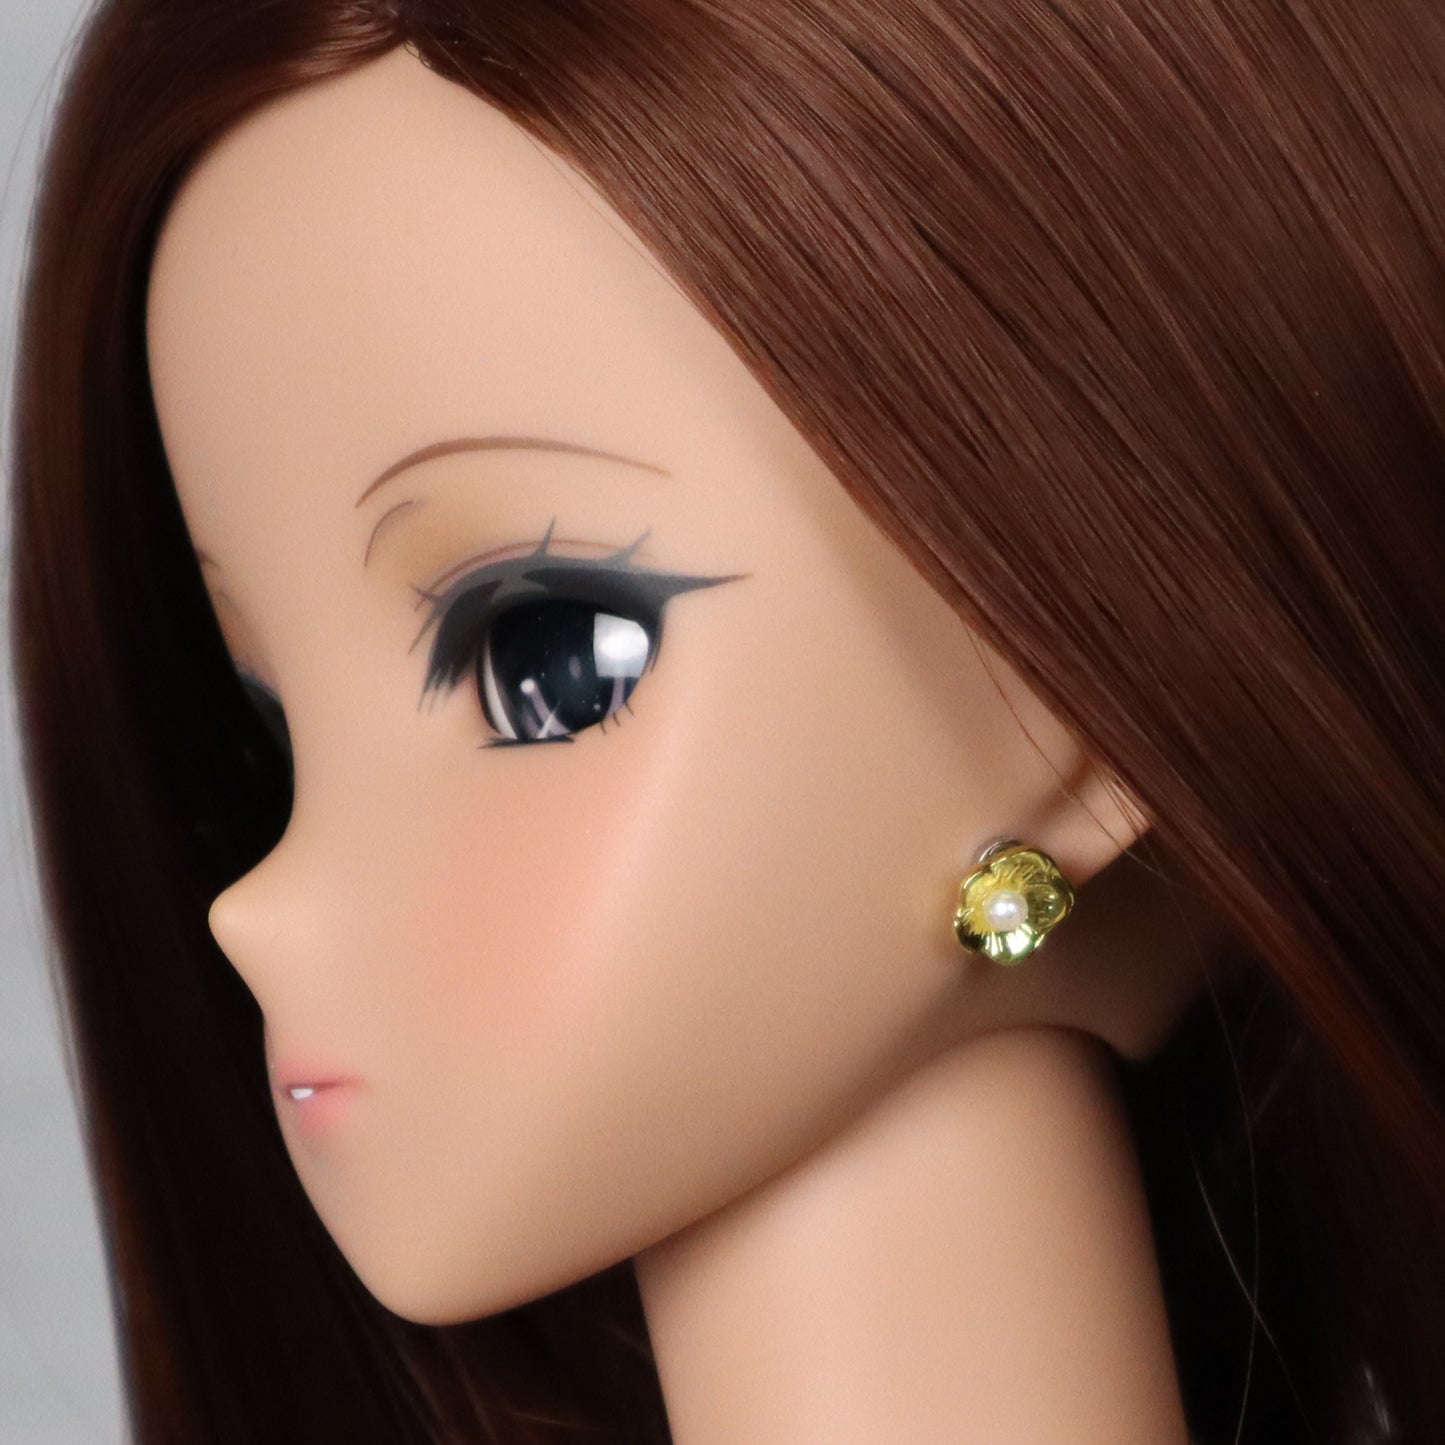 No-Hole Earrings for Vinyl Dolls - Gold Flower Stud with Pearl